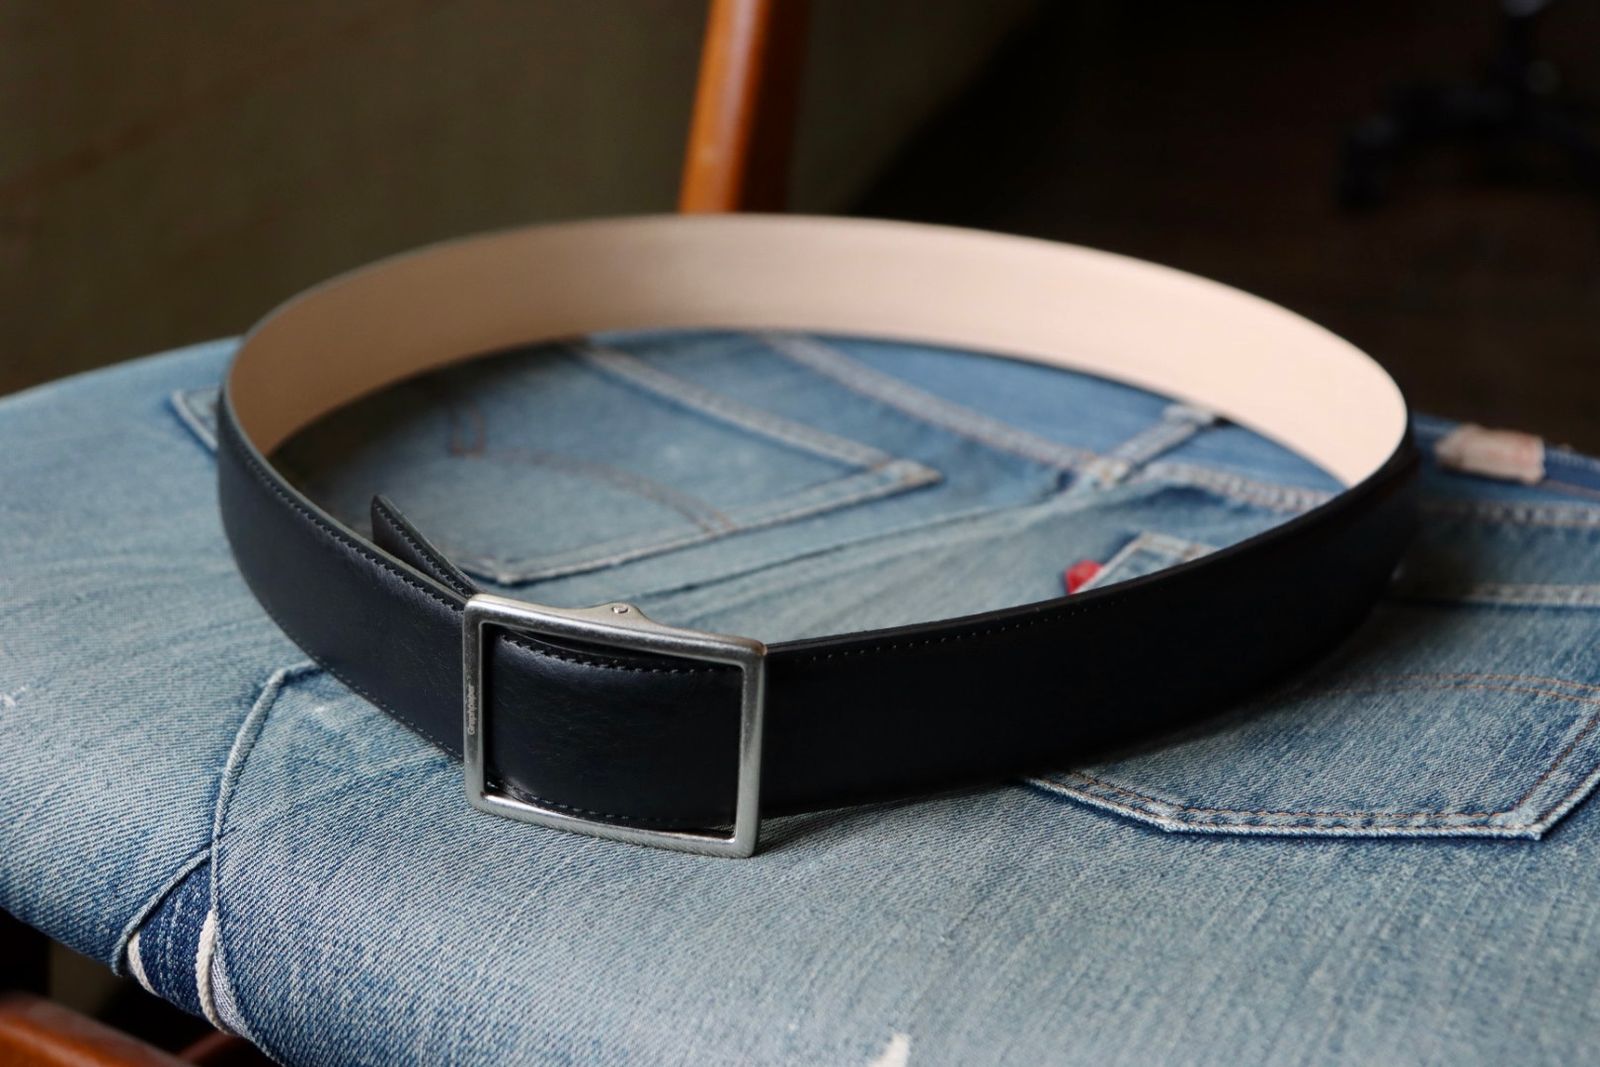 Graphpaper - グラフペーパー23AW Holeless Leather Classic Belt